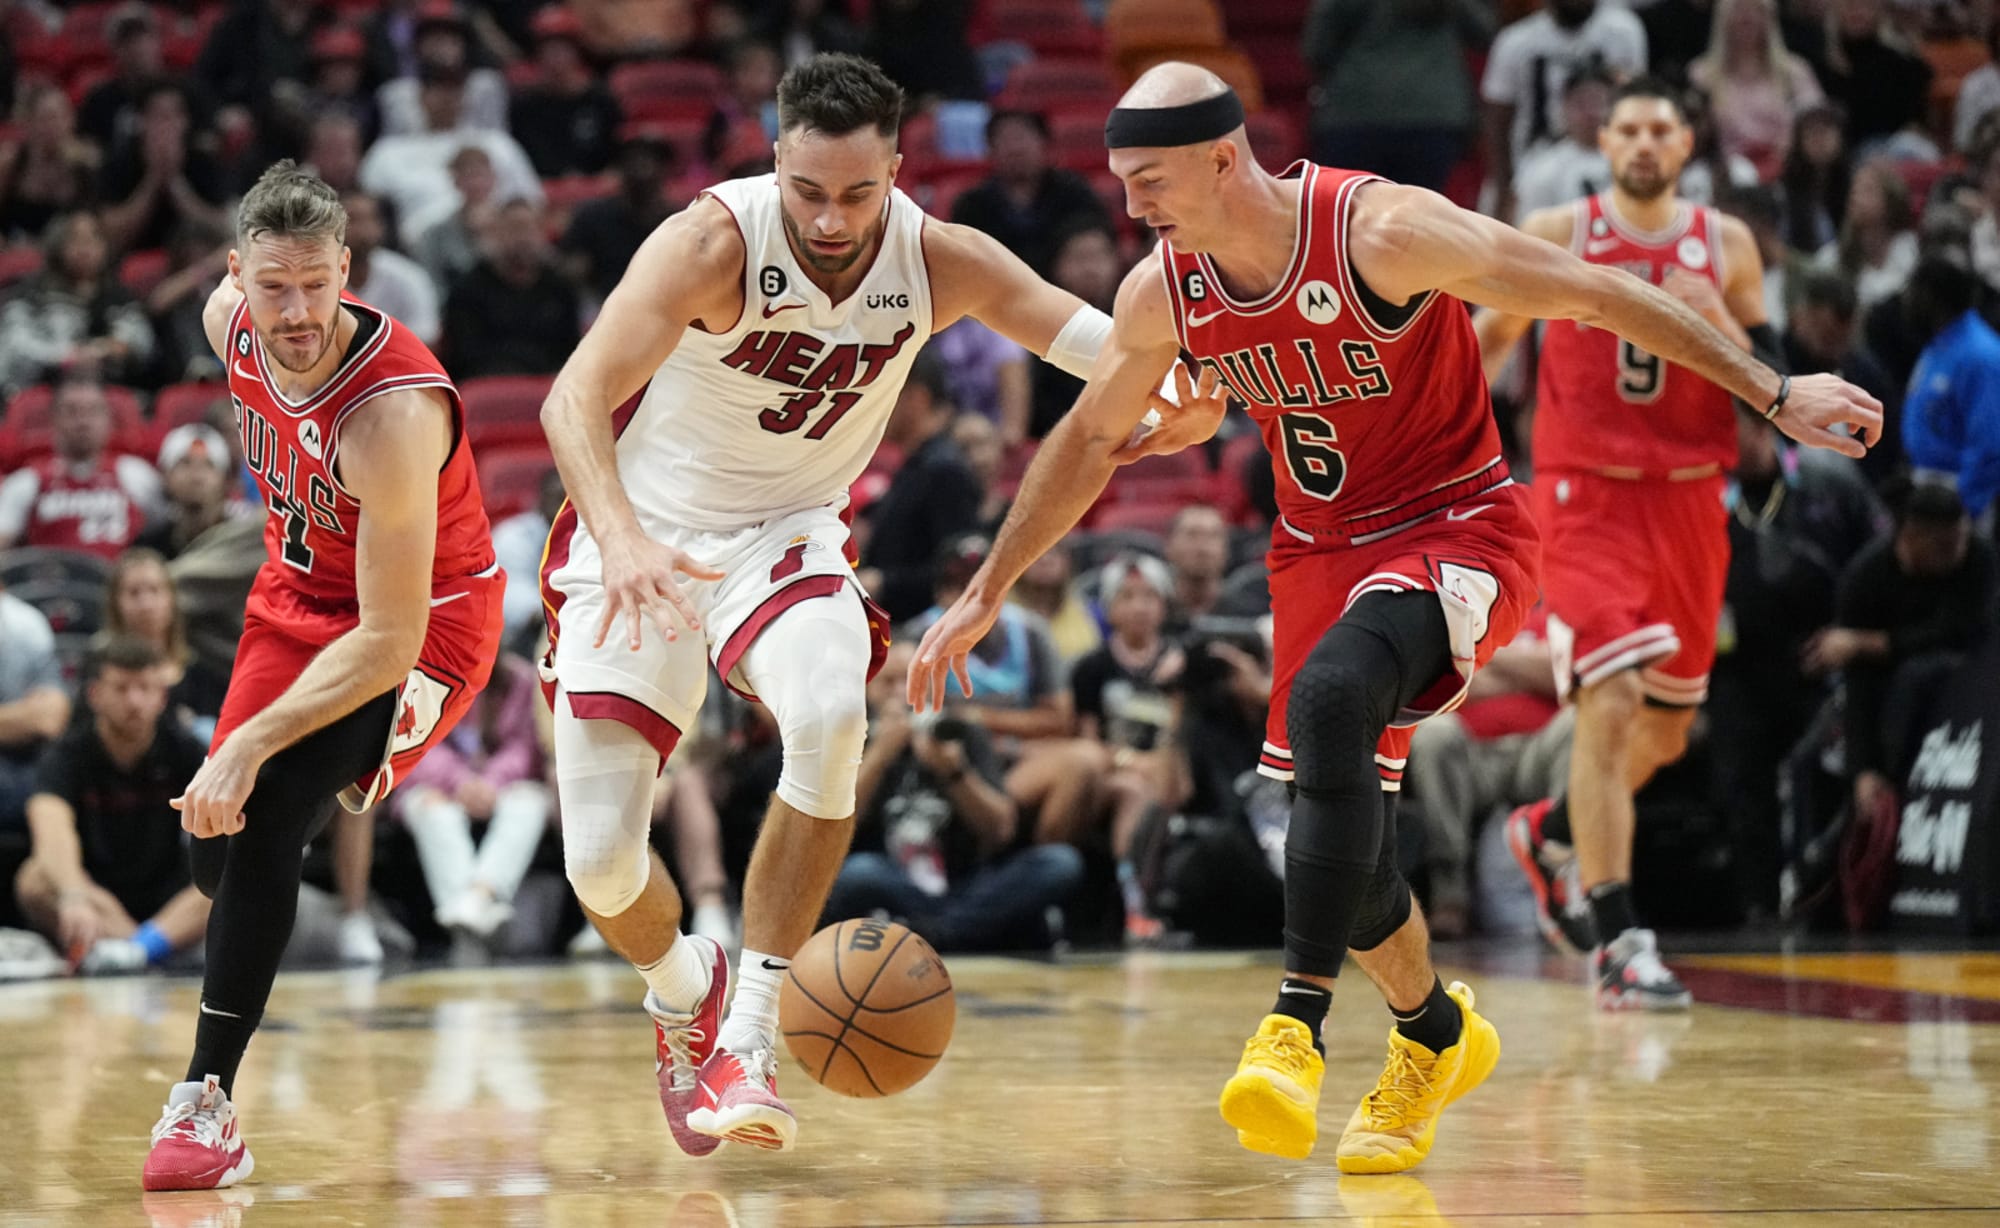 NBA Rumors: Could Goran Dragic's days be numbered on the Bulls?